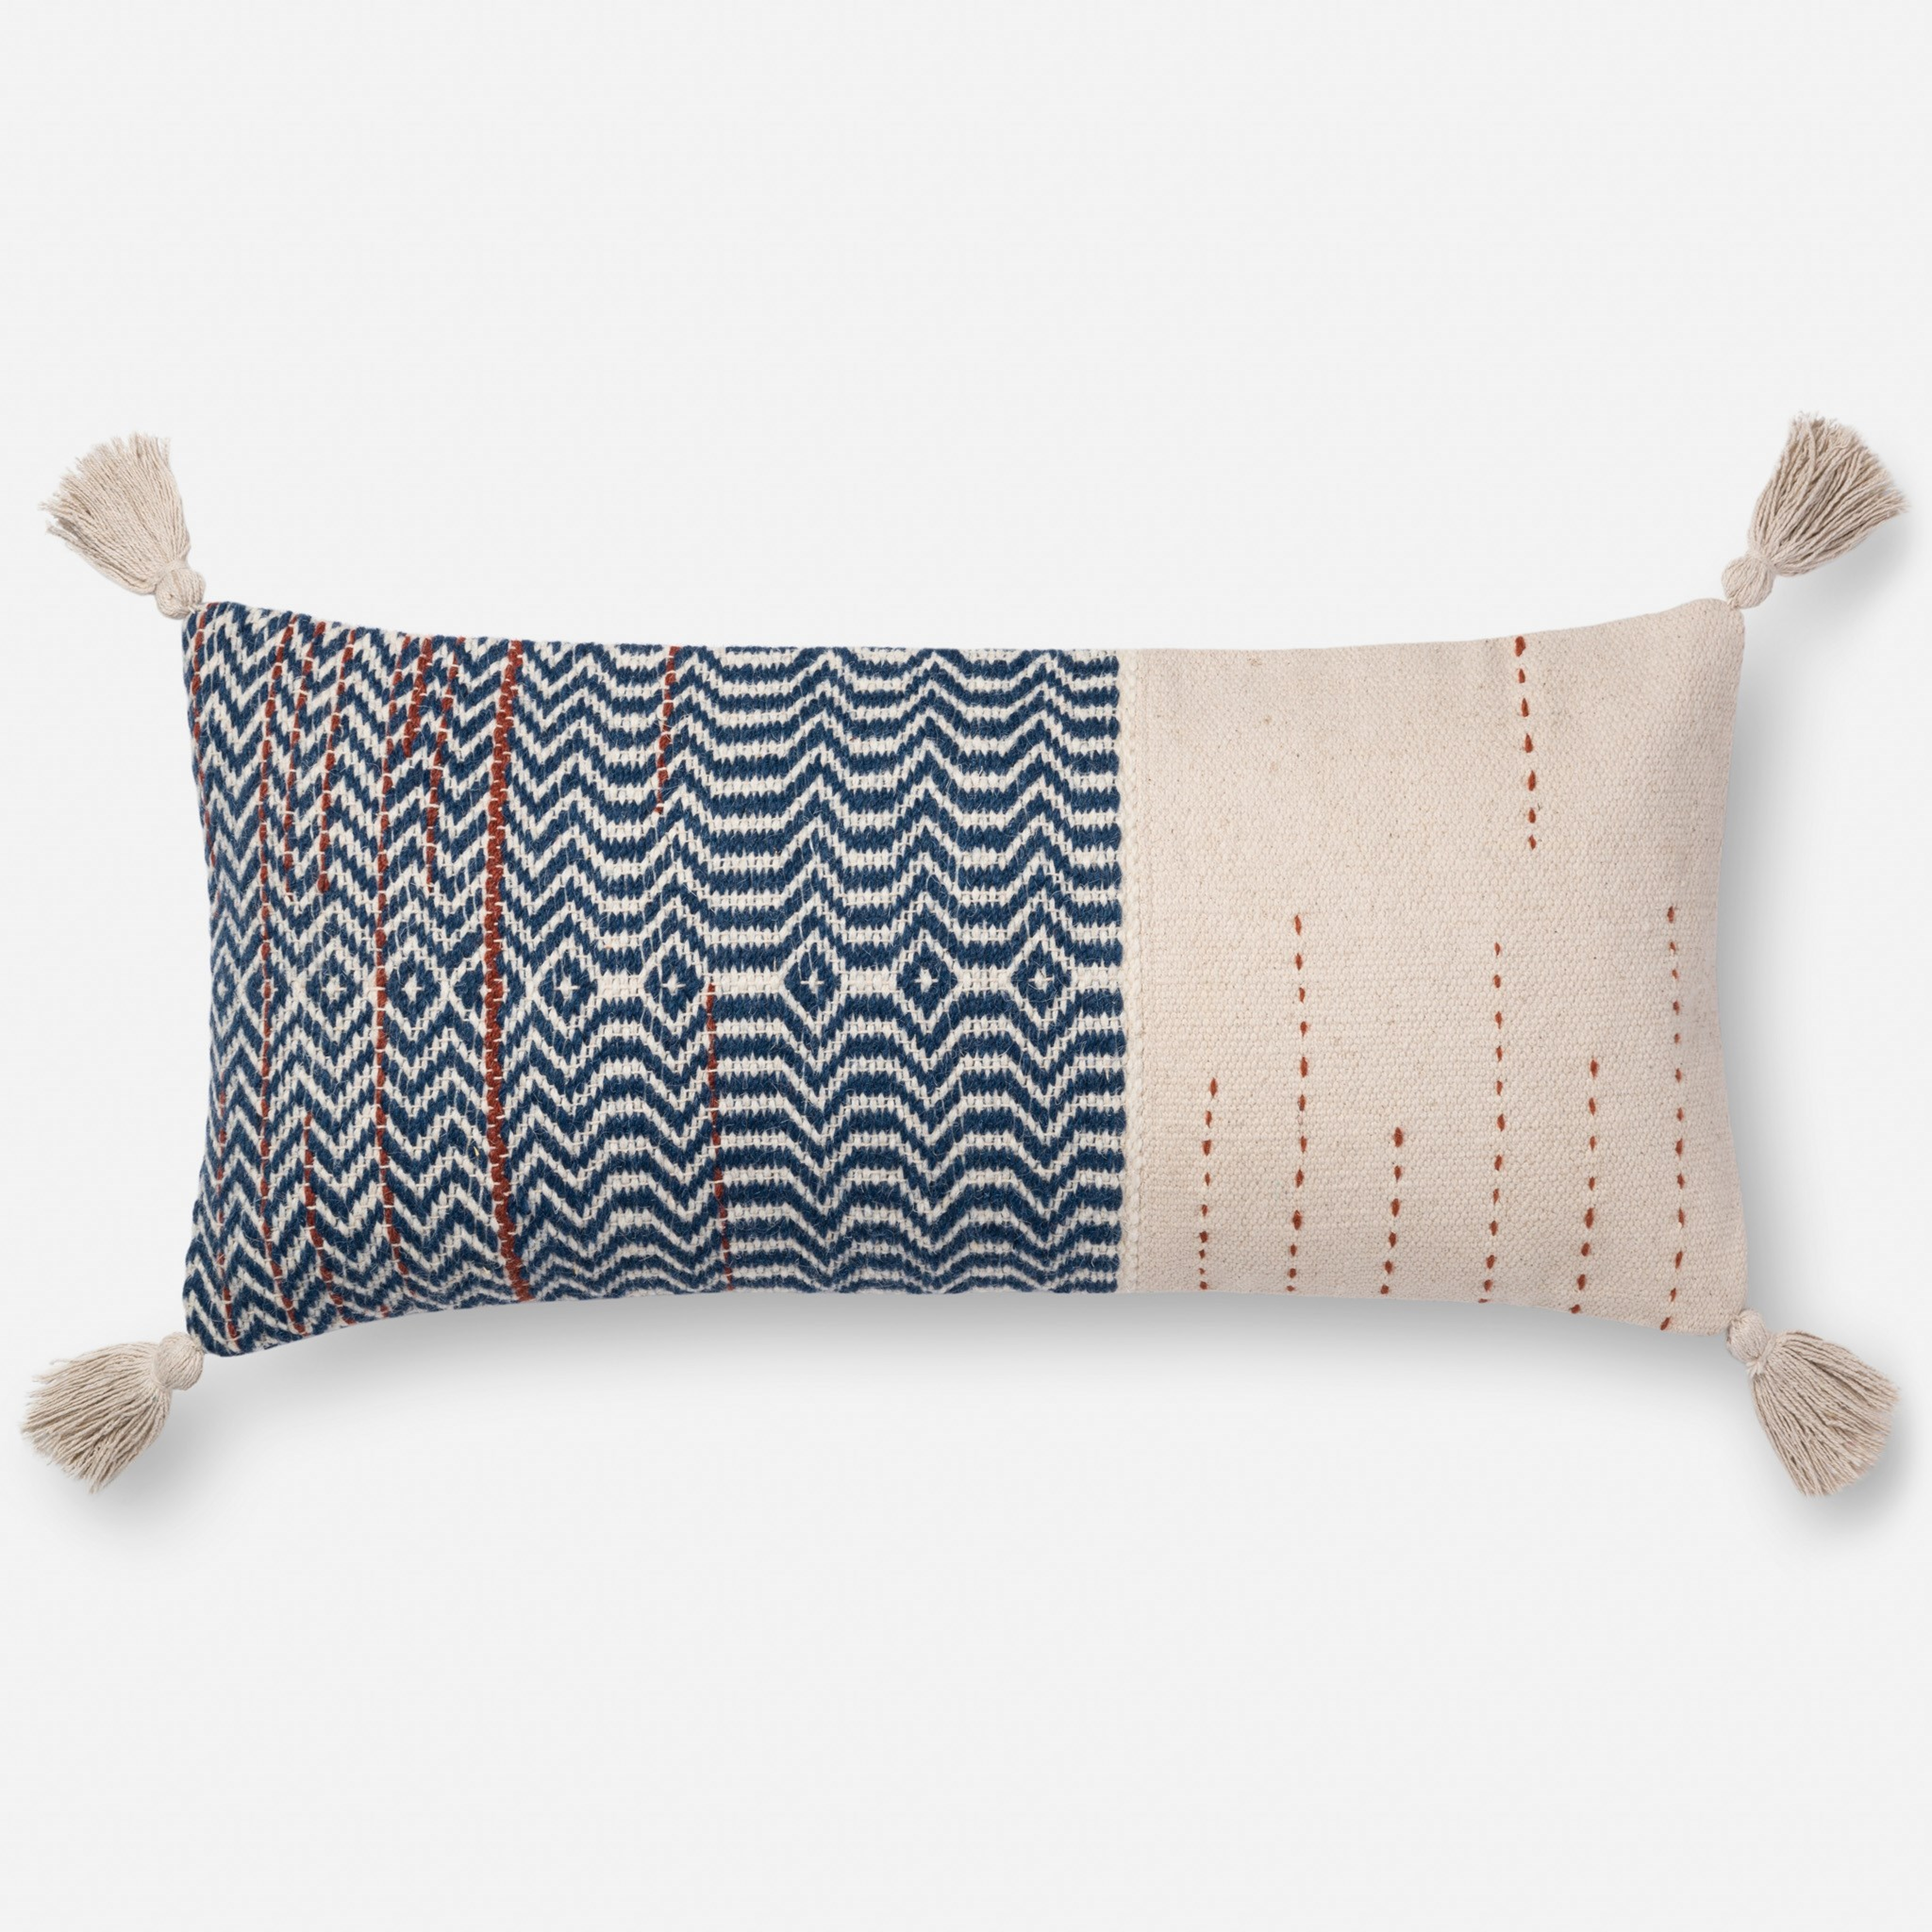 PILLOWS - IVORY / INDIGO - Magnolia Home by Joana Gaines Crafted by Loloi Rugs